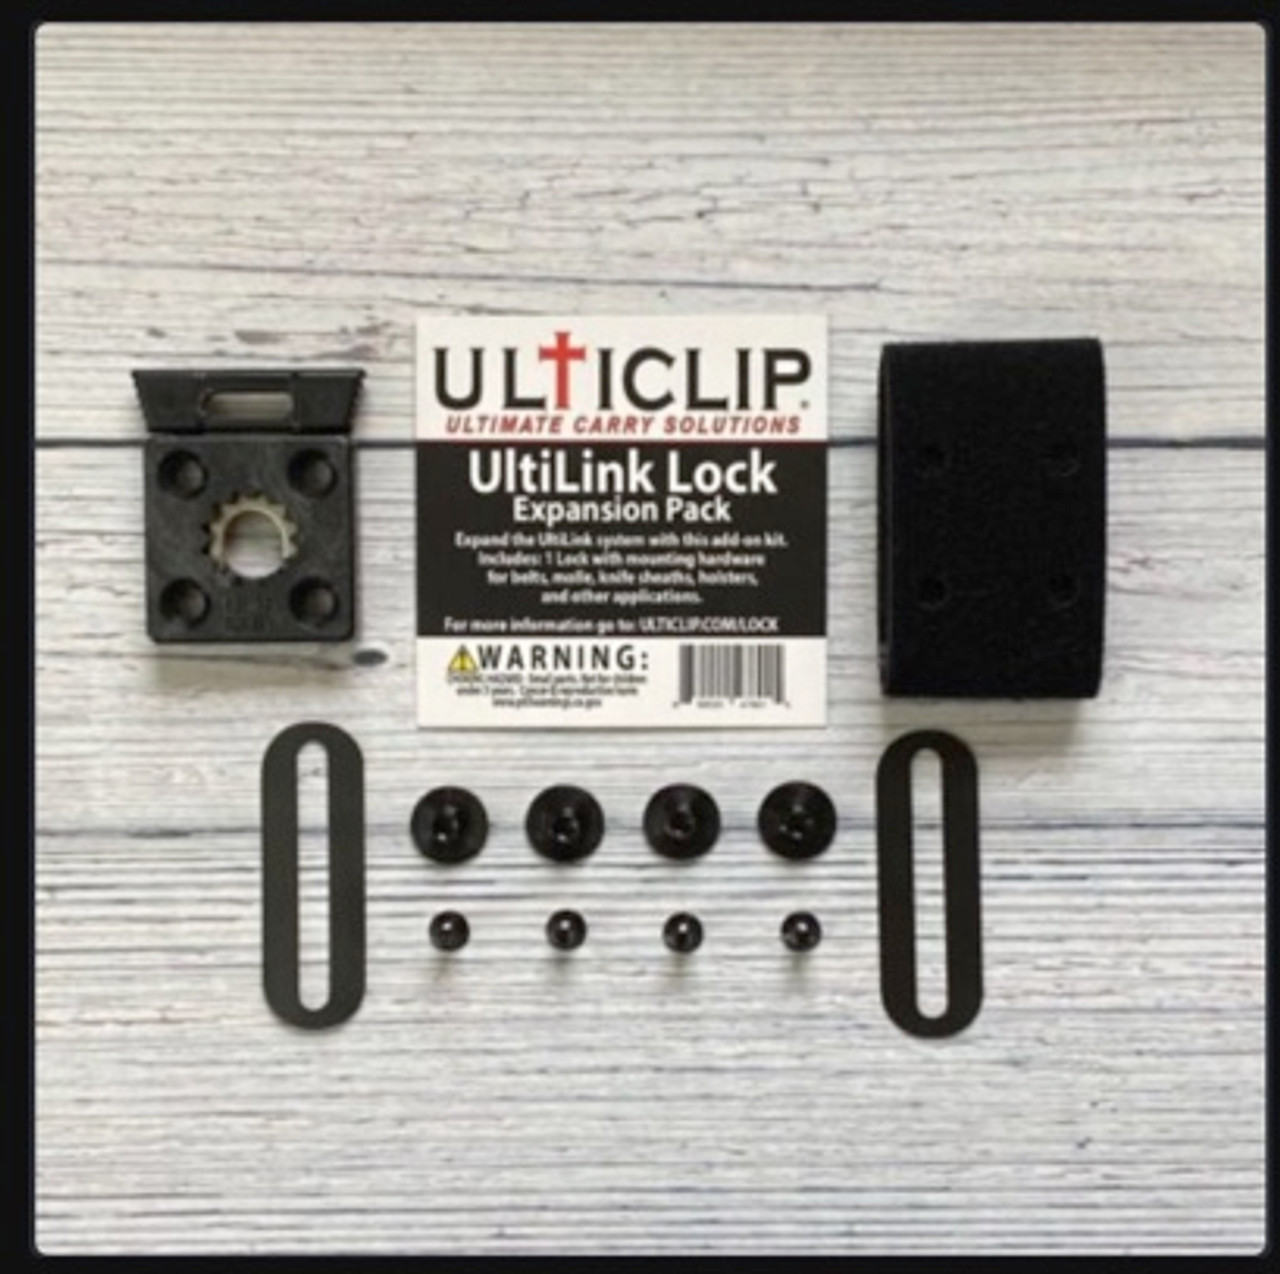 Ulticlip - SLIM 2.2 Ultimate Carry Solution - Pineland Cutlery